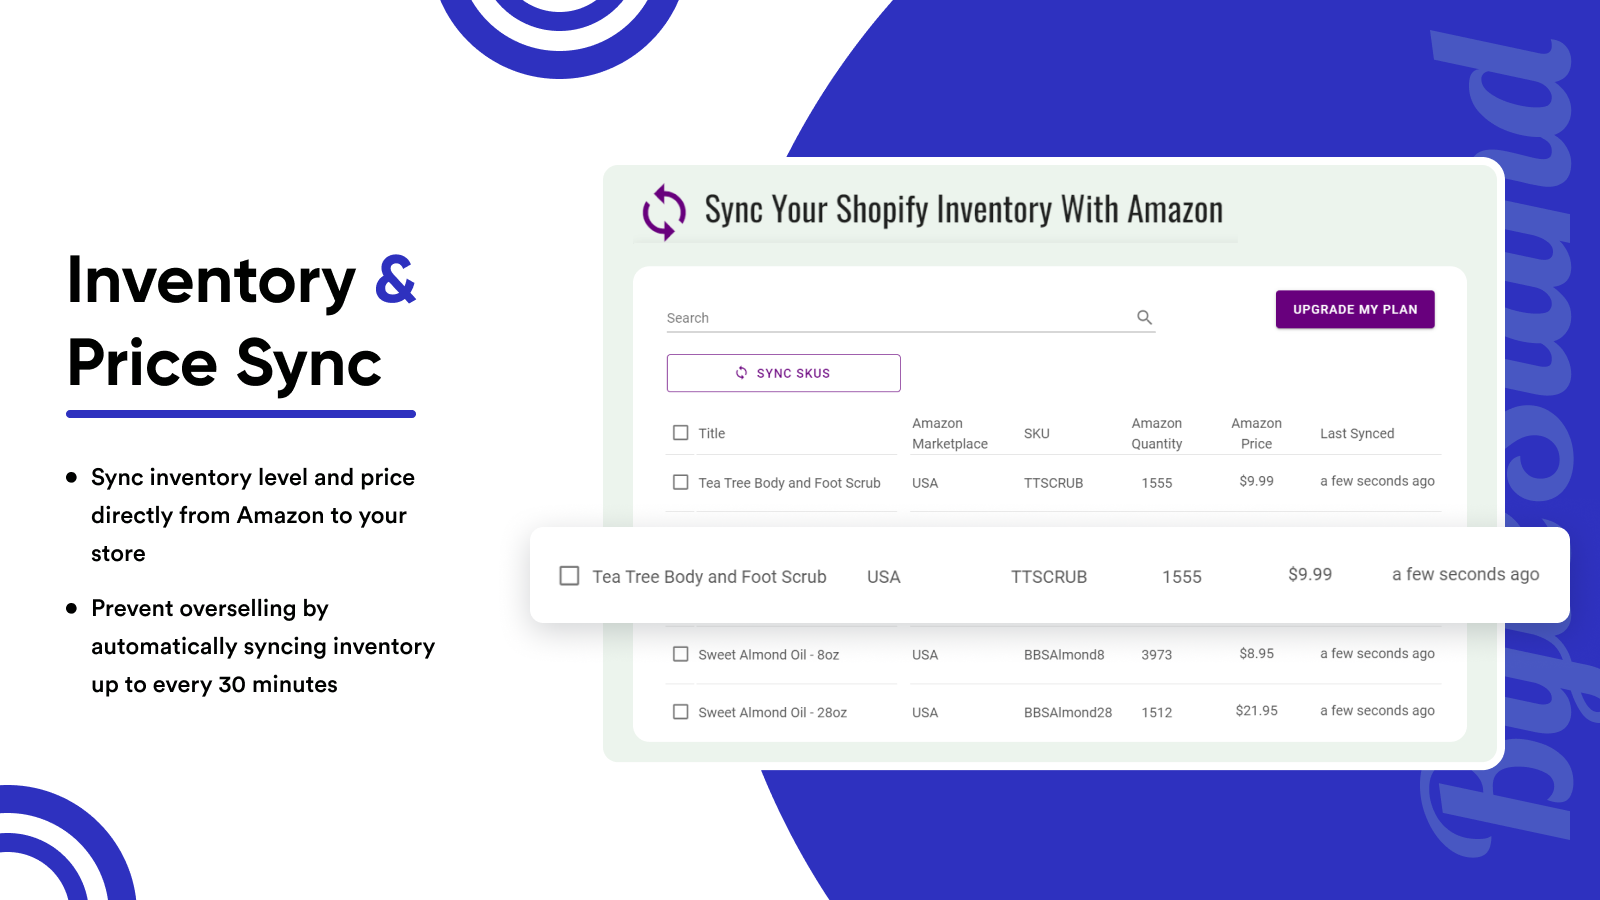 Inventory & Price Sync from Amazon MCF to Shopify automatically